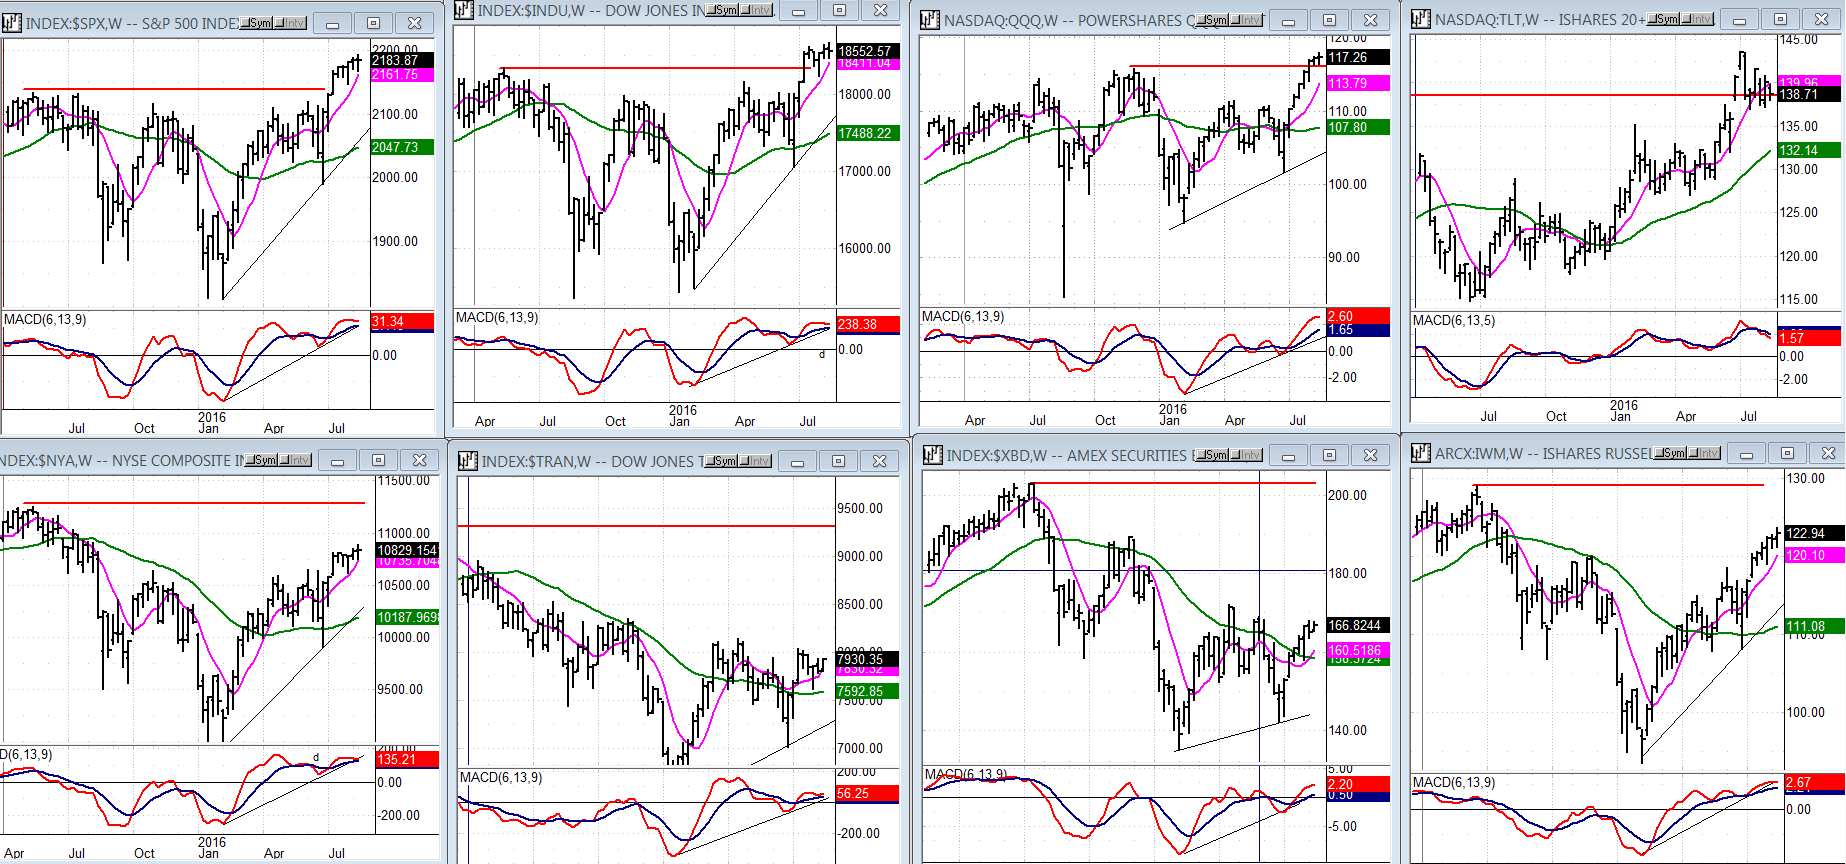 Some Leading & Confirming Indexes